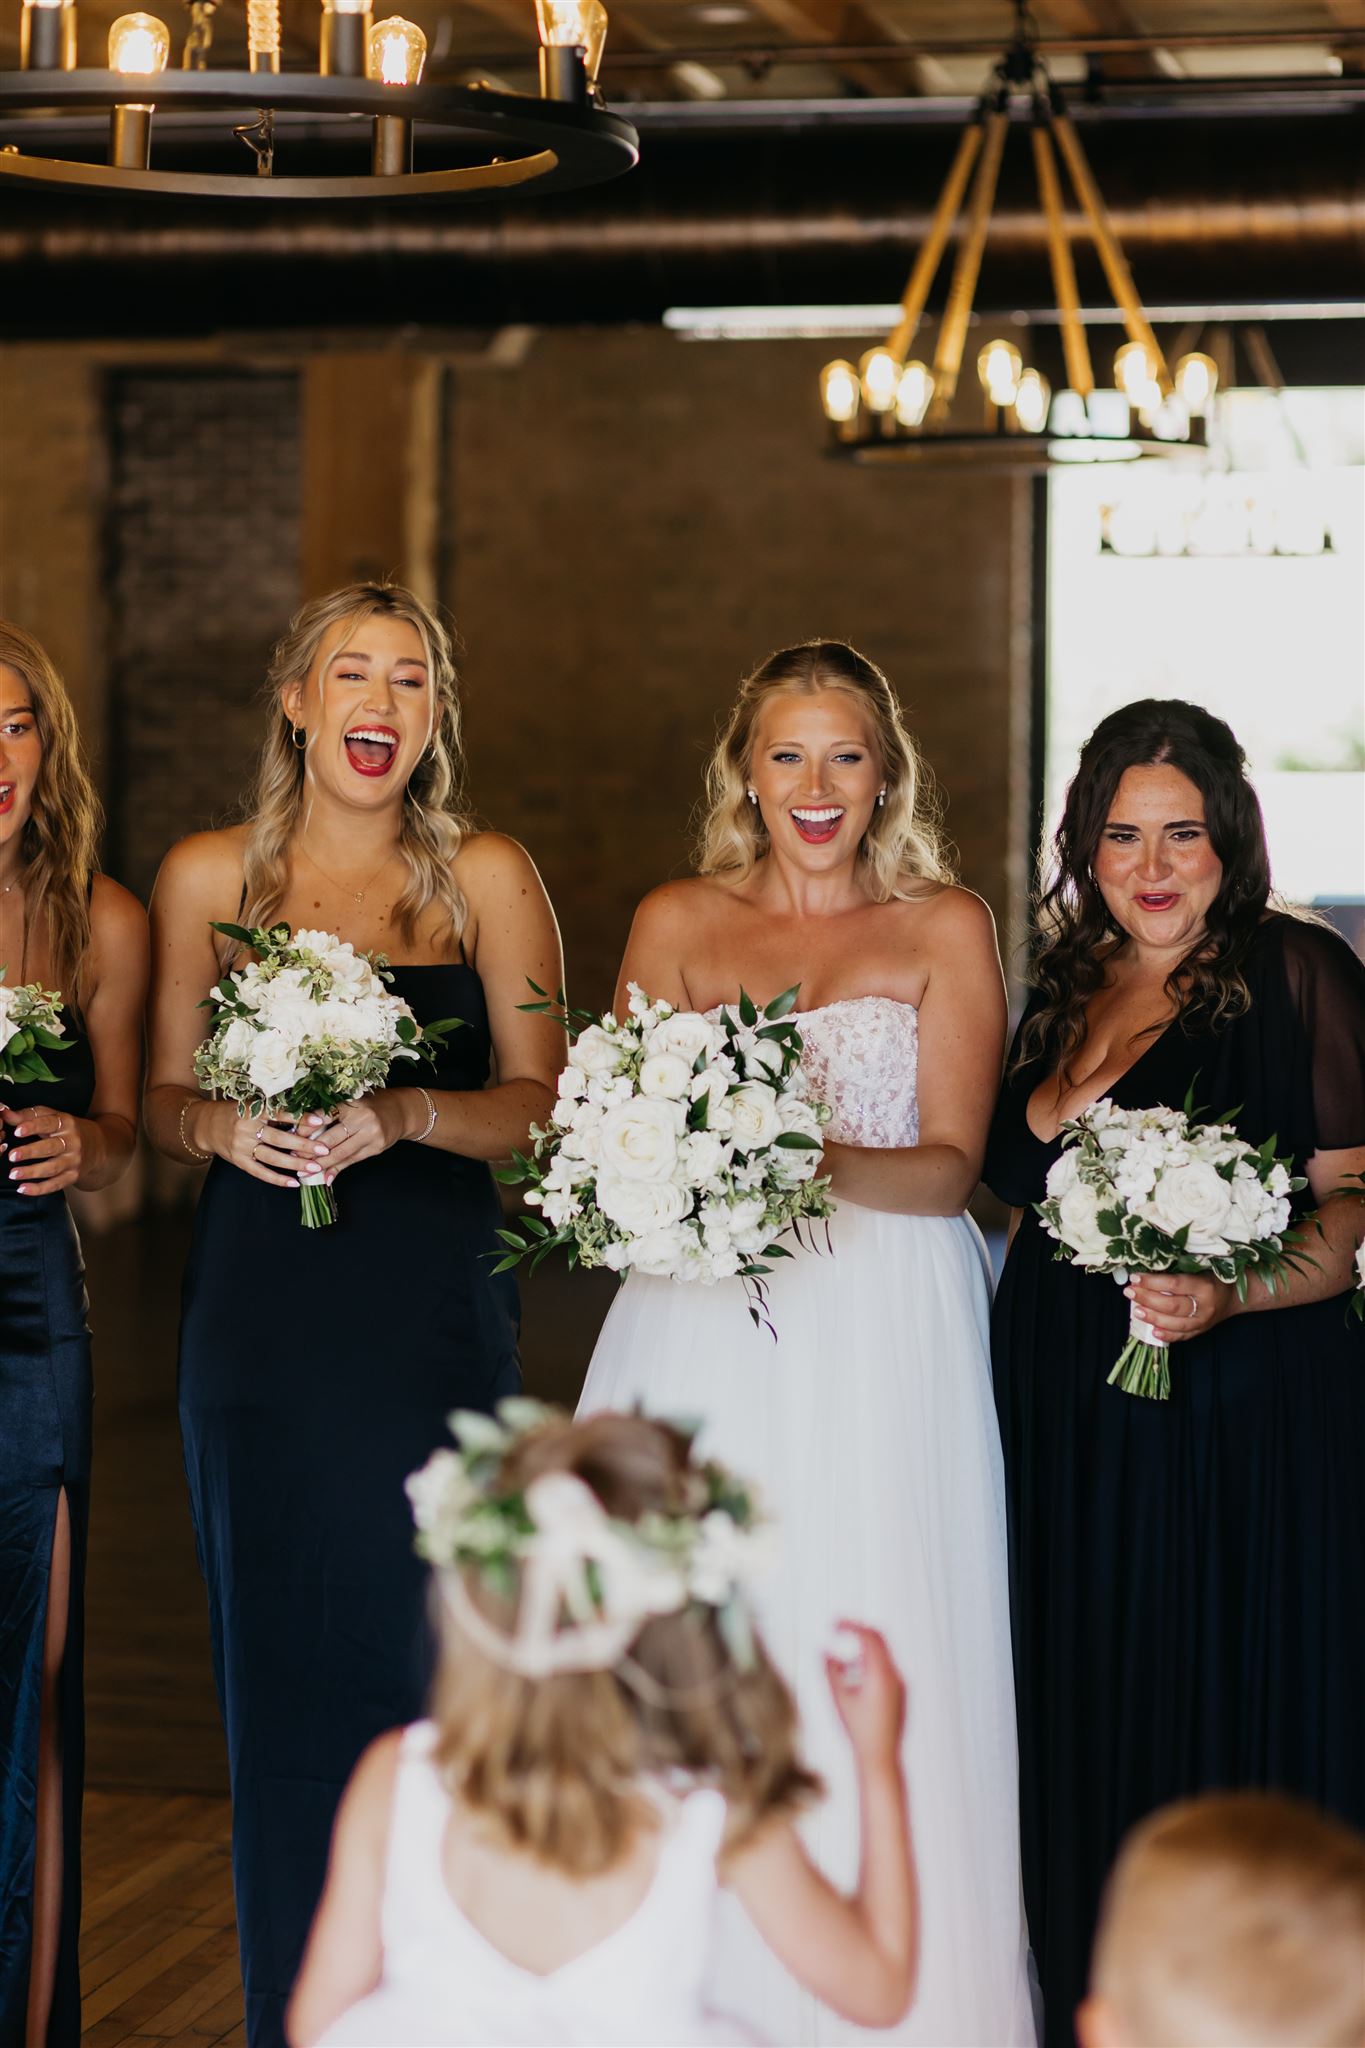 A shot of the bride and her bridesmaids surprised